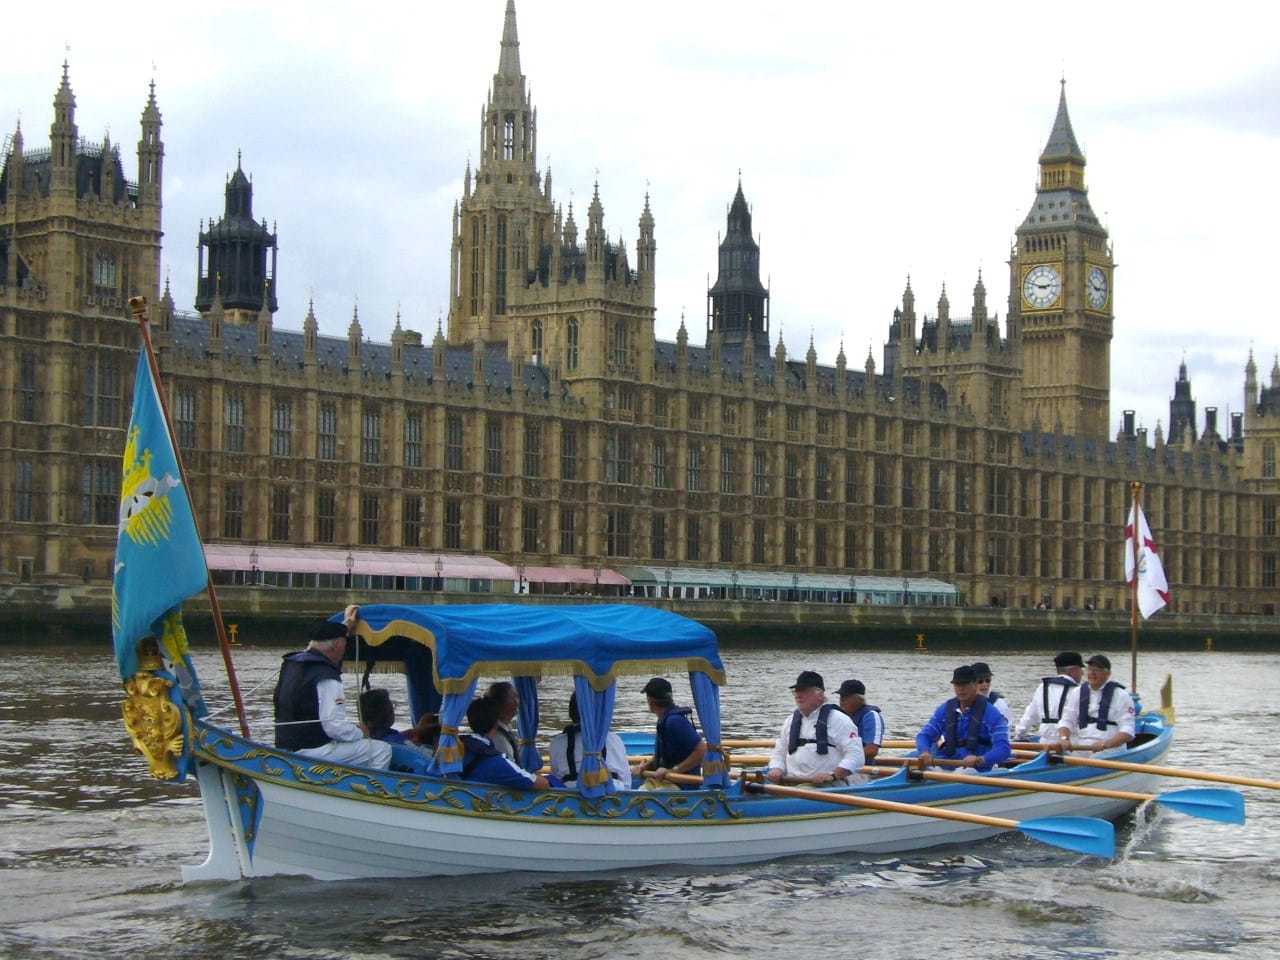 2007-7 The shallop passed the Houses of Parliament